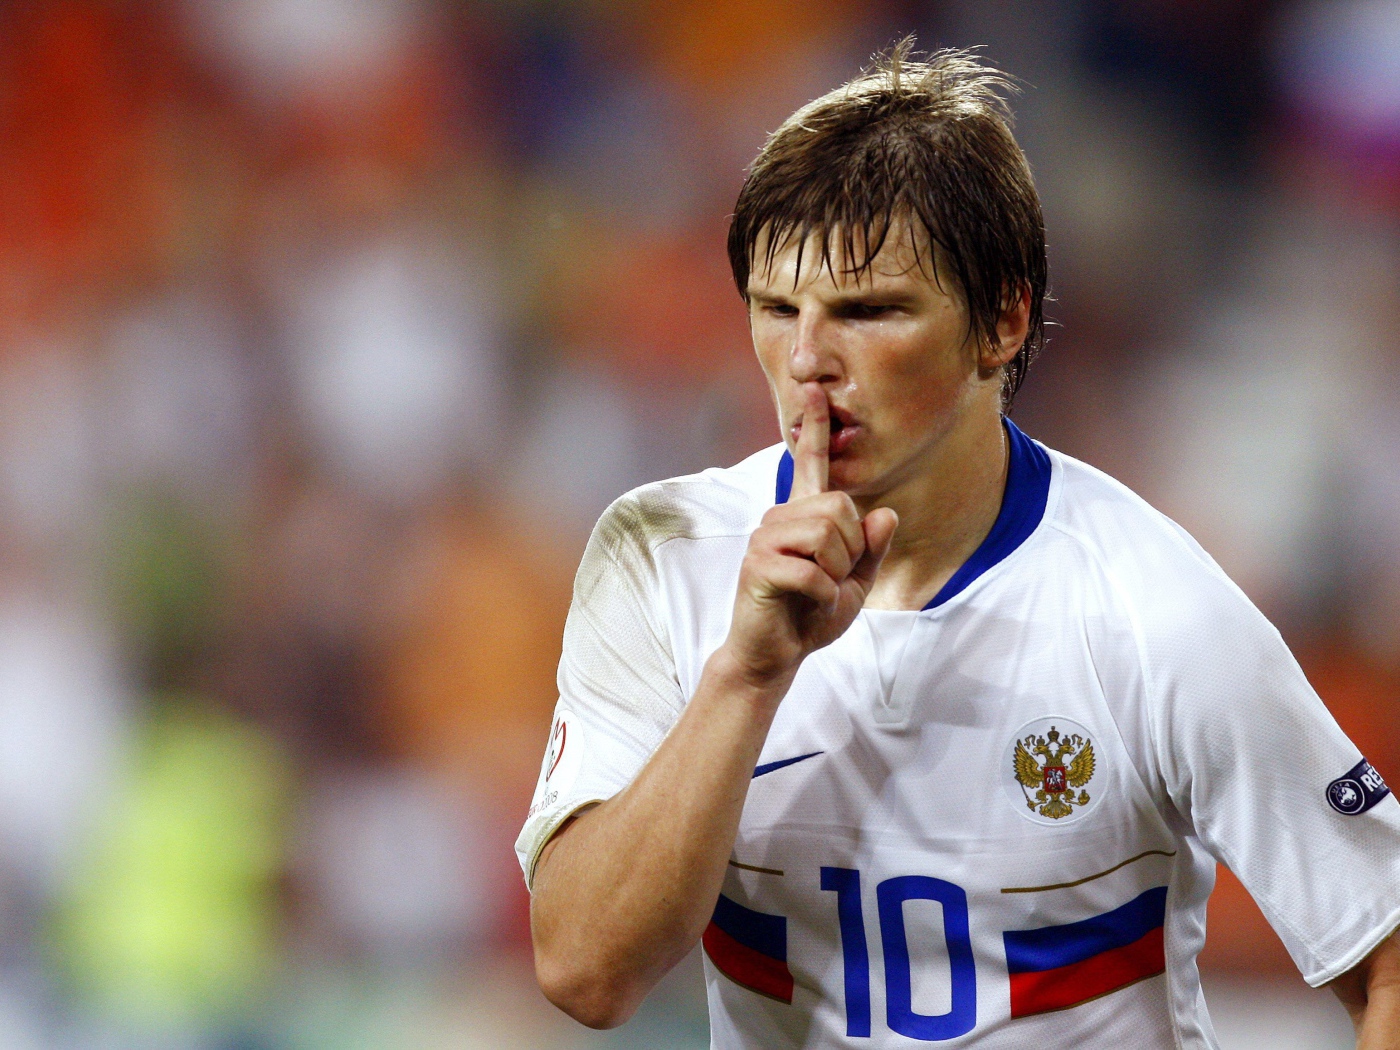 Andrei Arshavin Russian national team player on the field